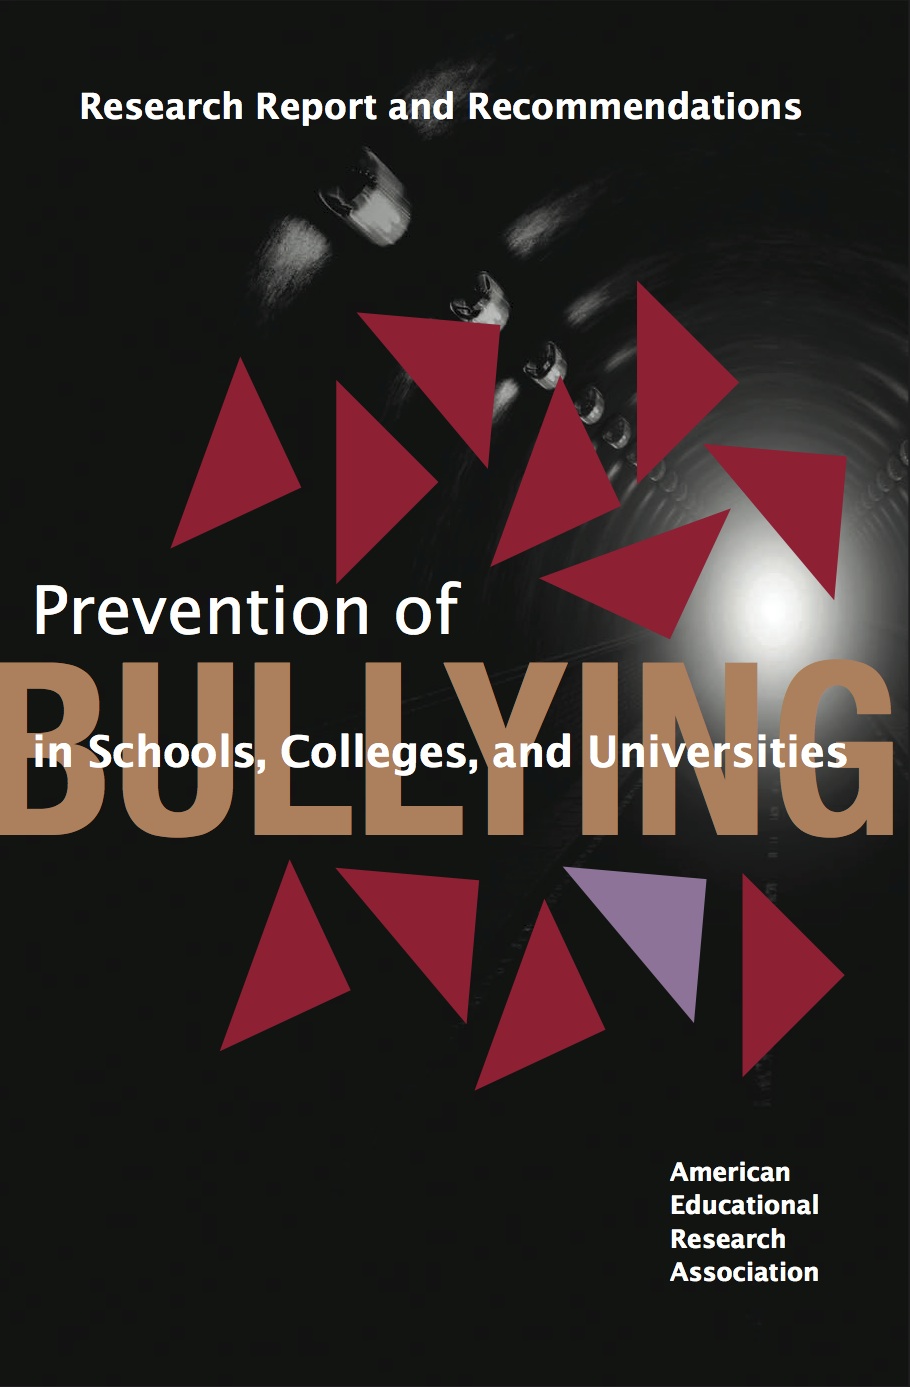 research topic on bullying